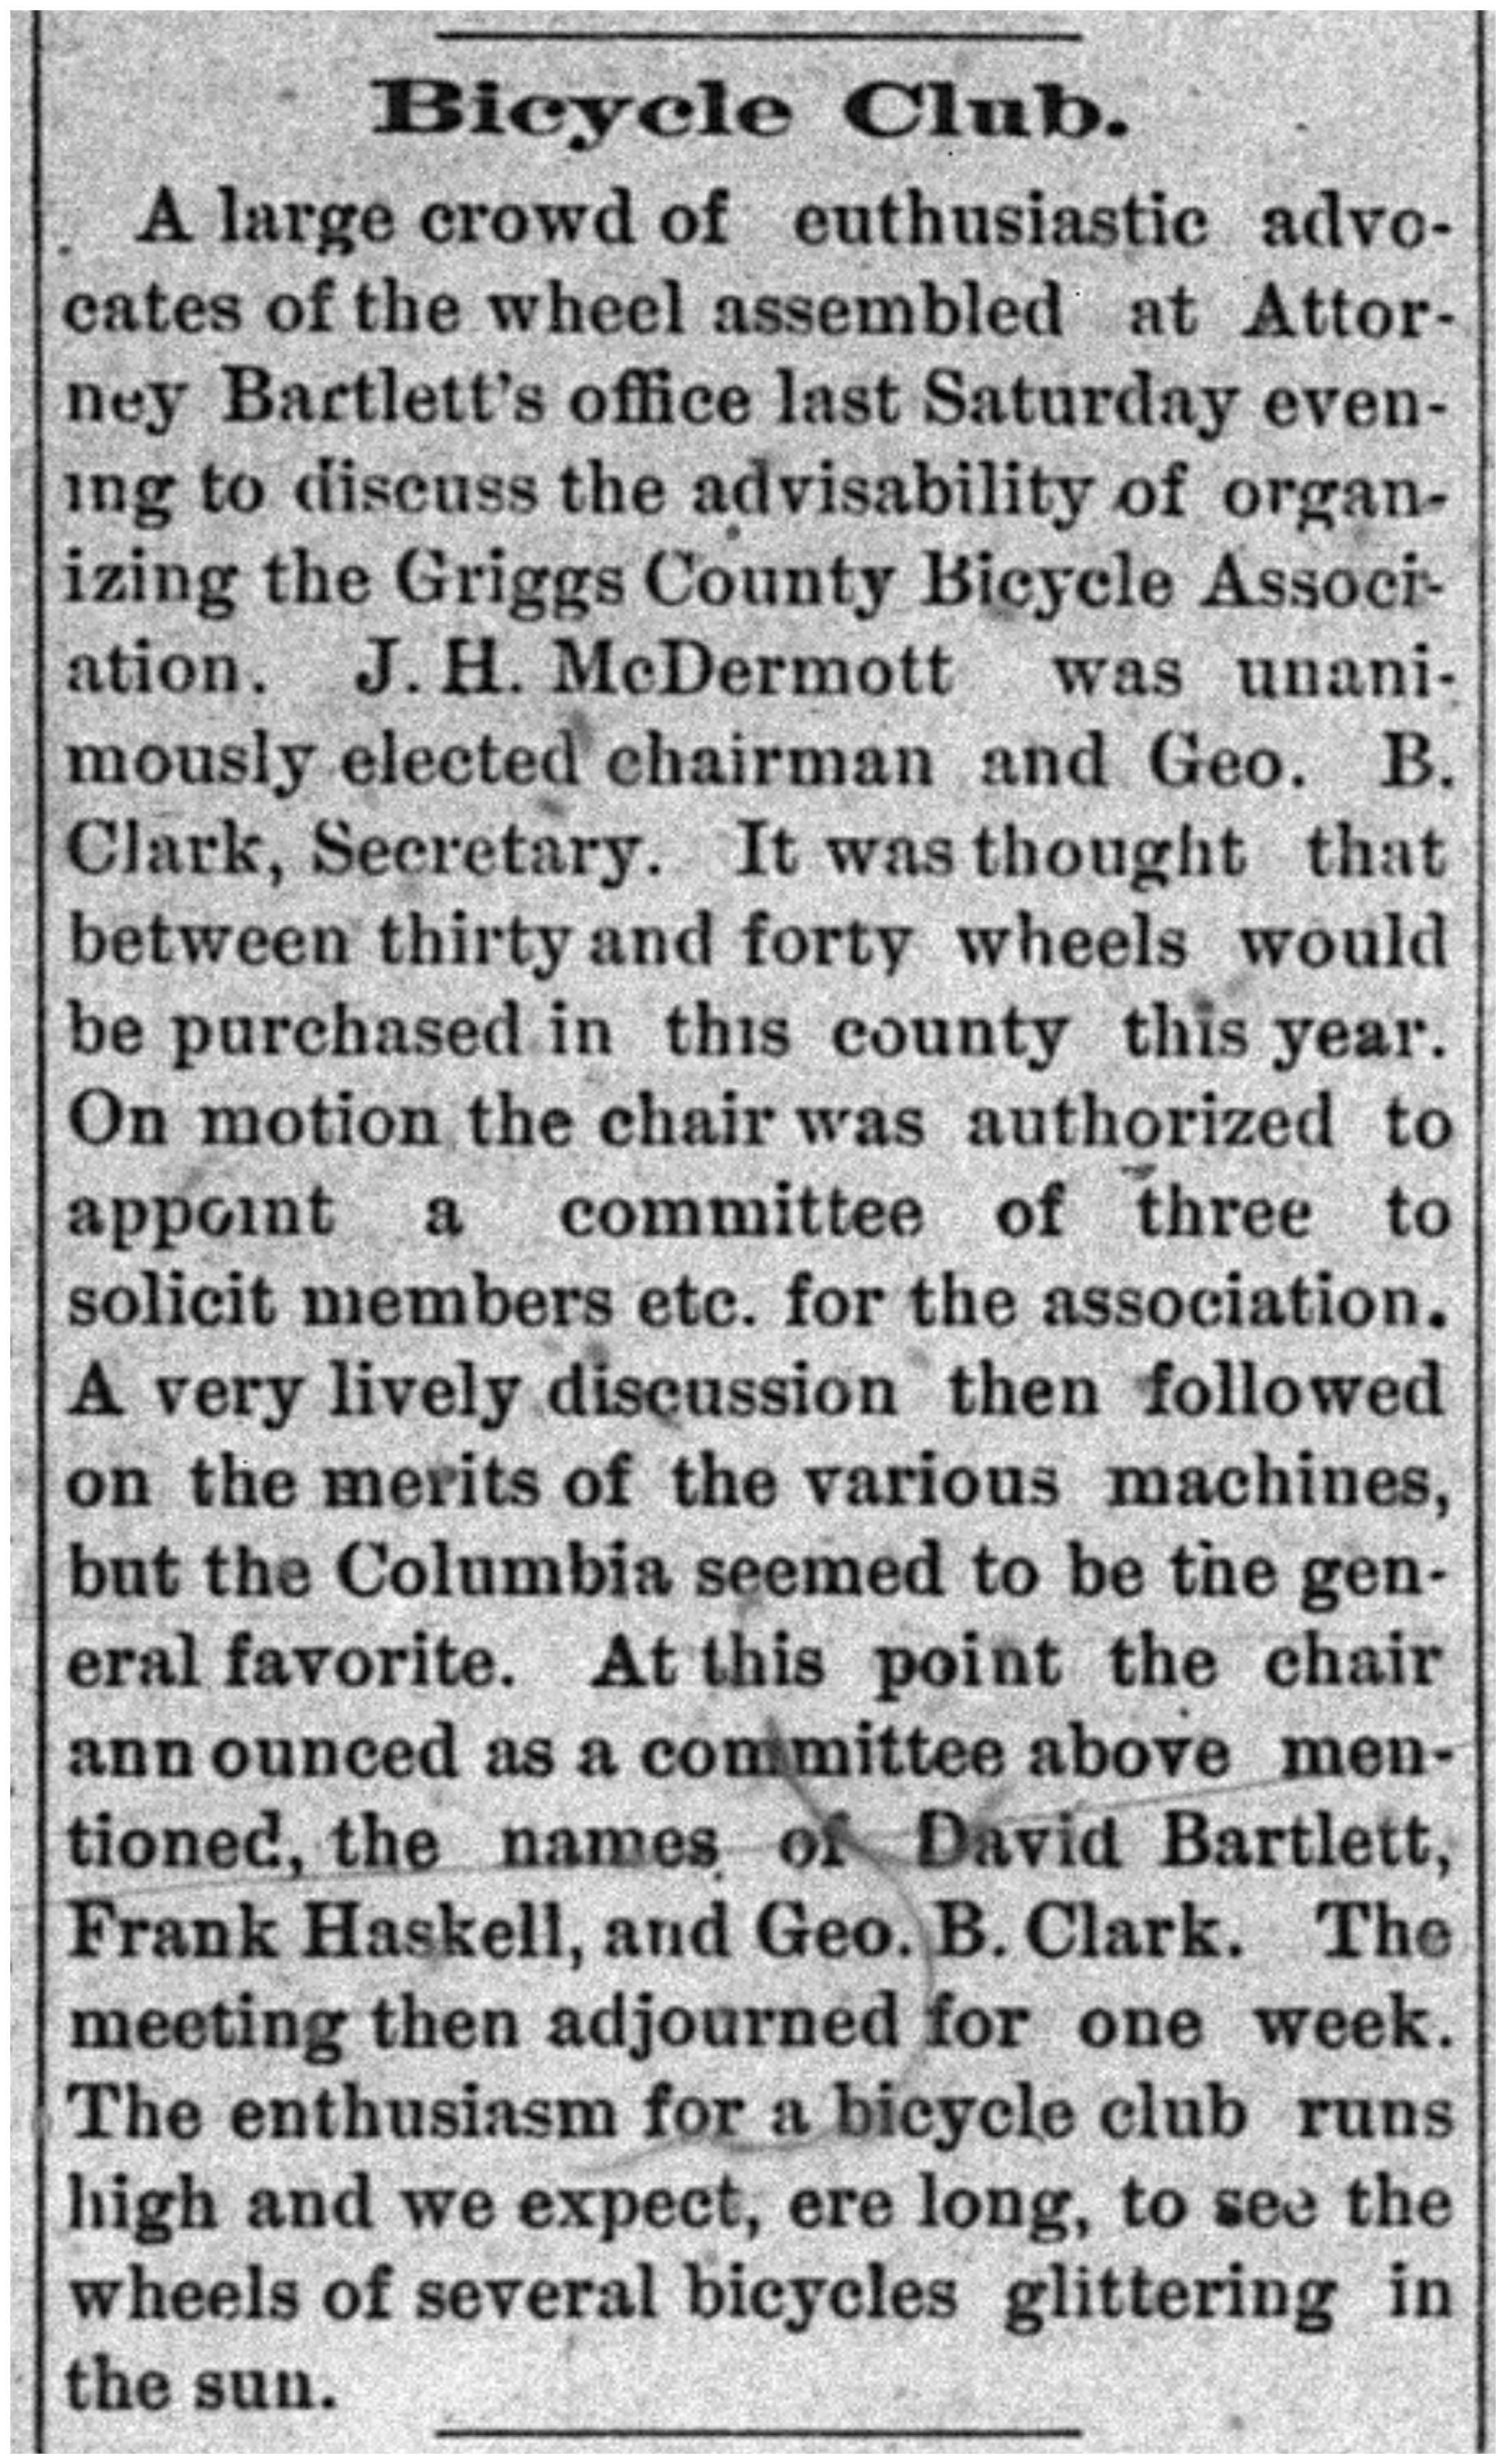 https://www.griggscountyhistoricalsociety.com/online/hadlock/set03/gc/gc_january_1890_to_december_1892/miscellaneous/griggs_county_bicycle_club_started_may_2,_1890_p5_gc.jpg